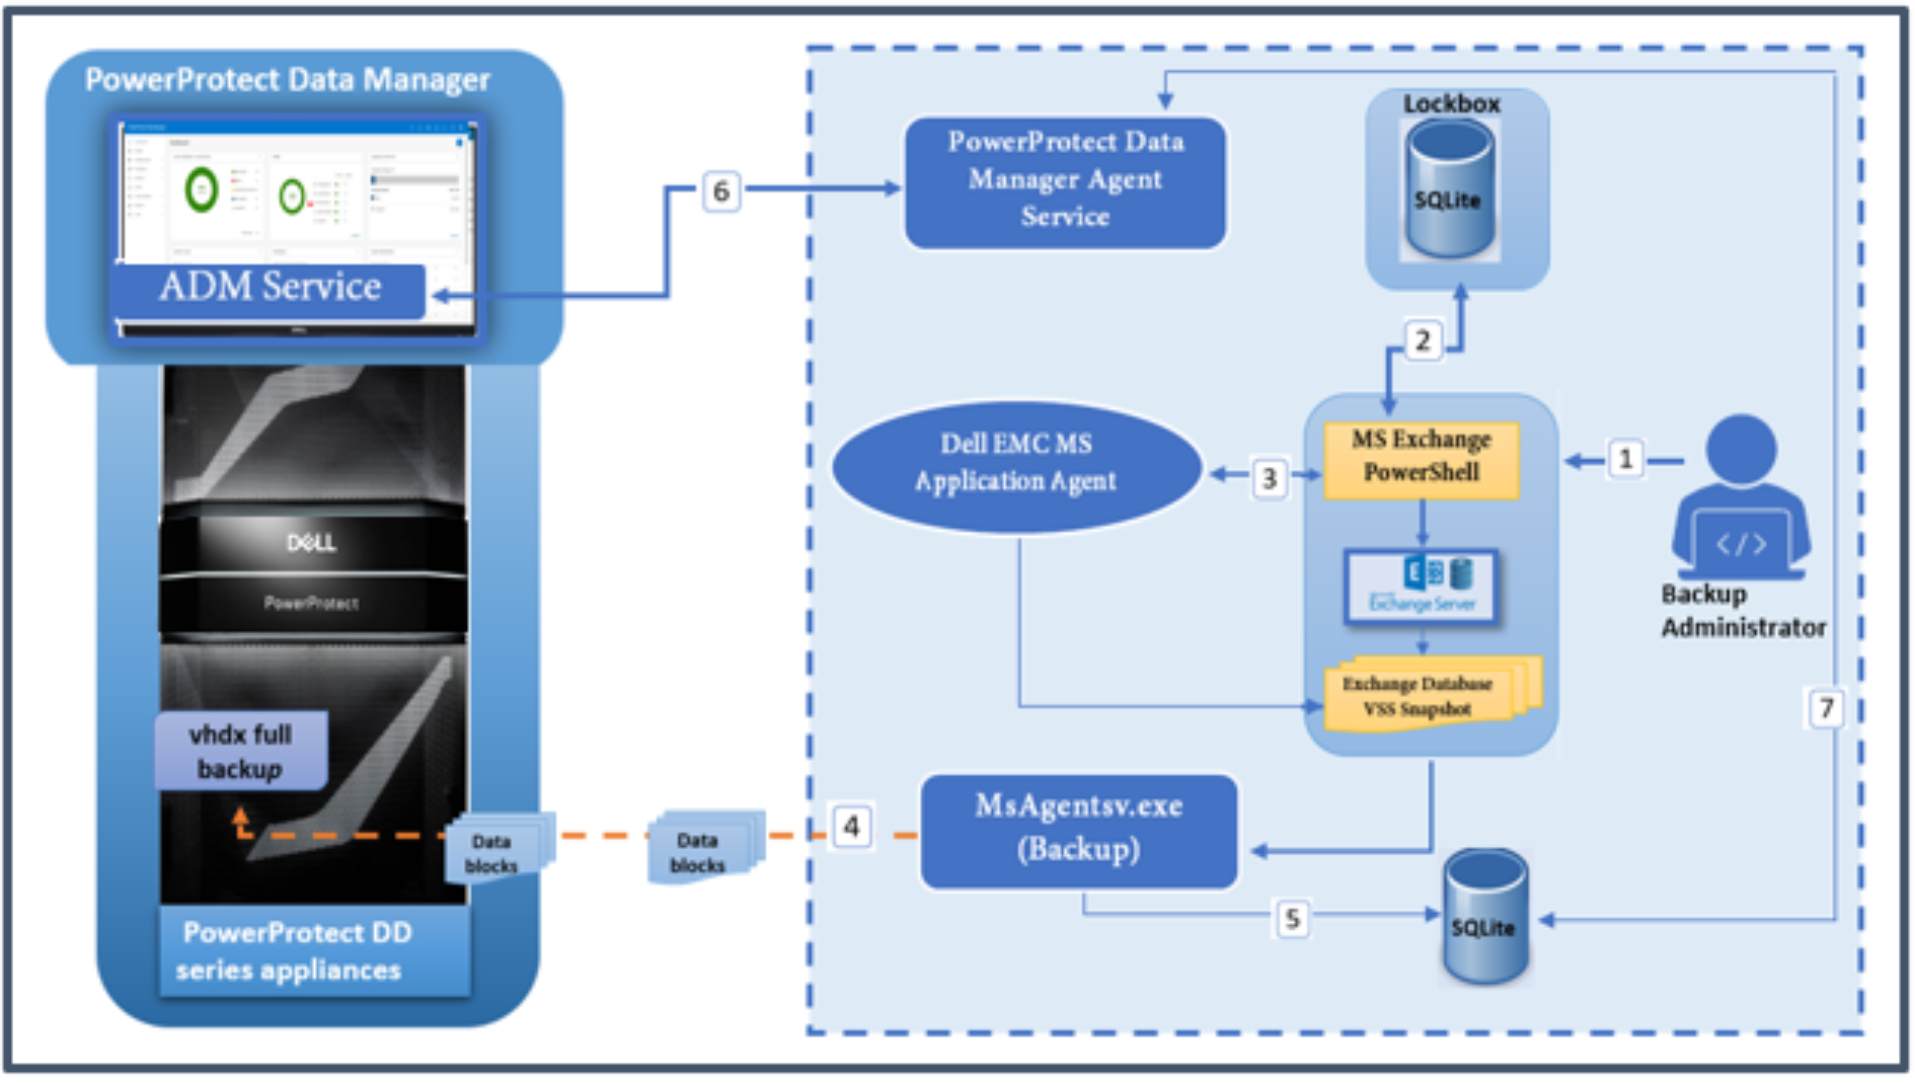 The image shows self-service backup workflow